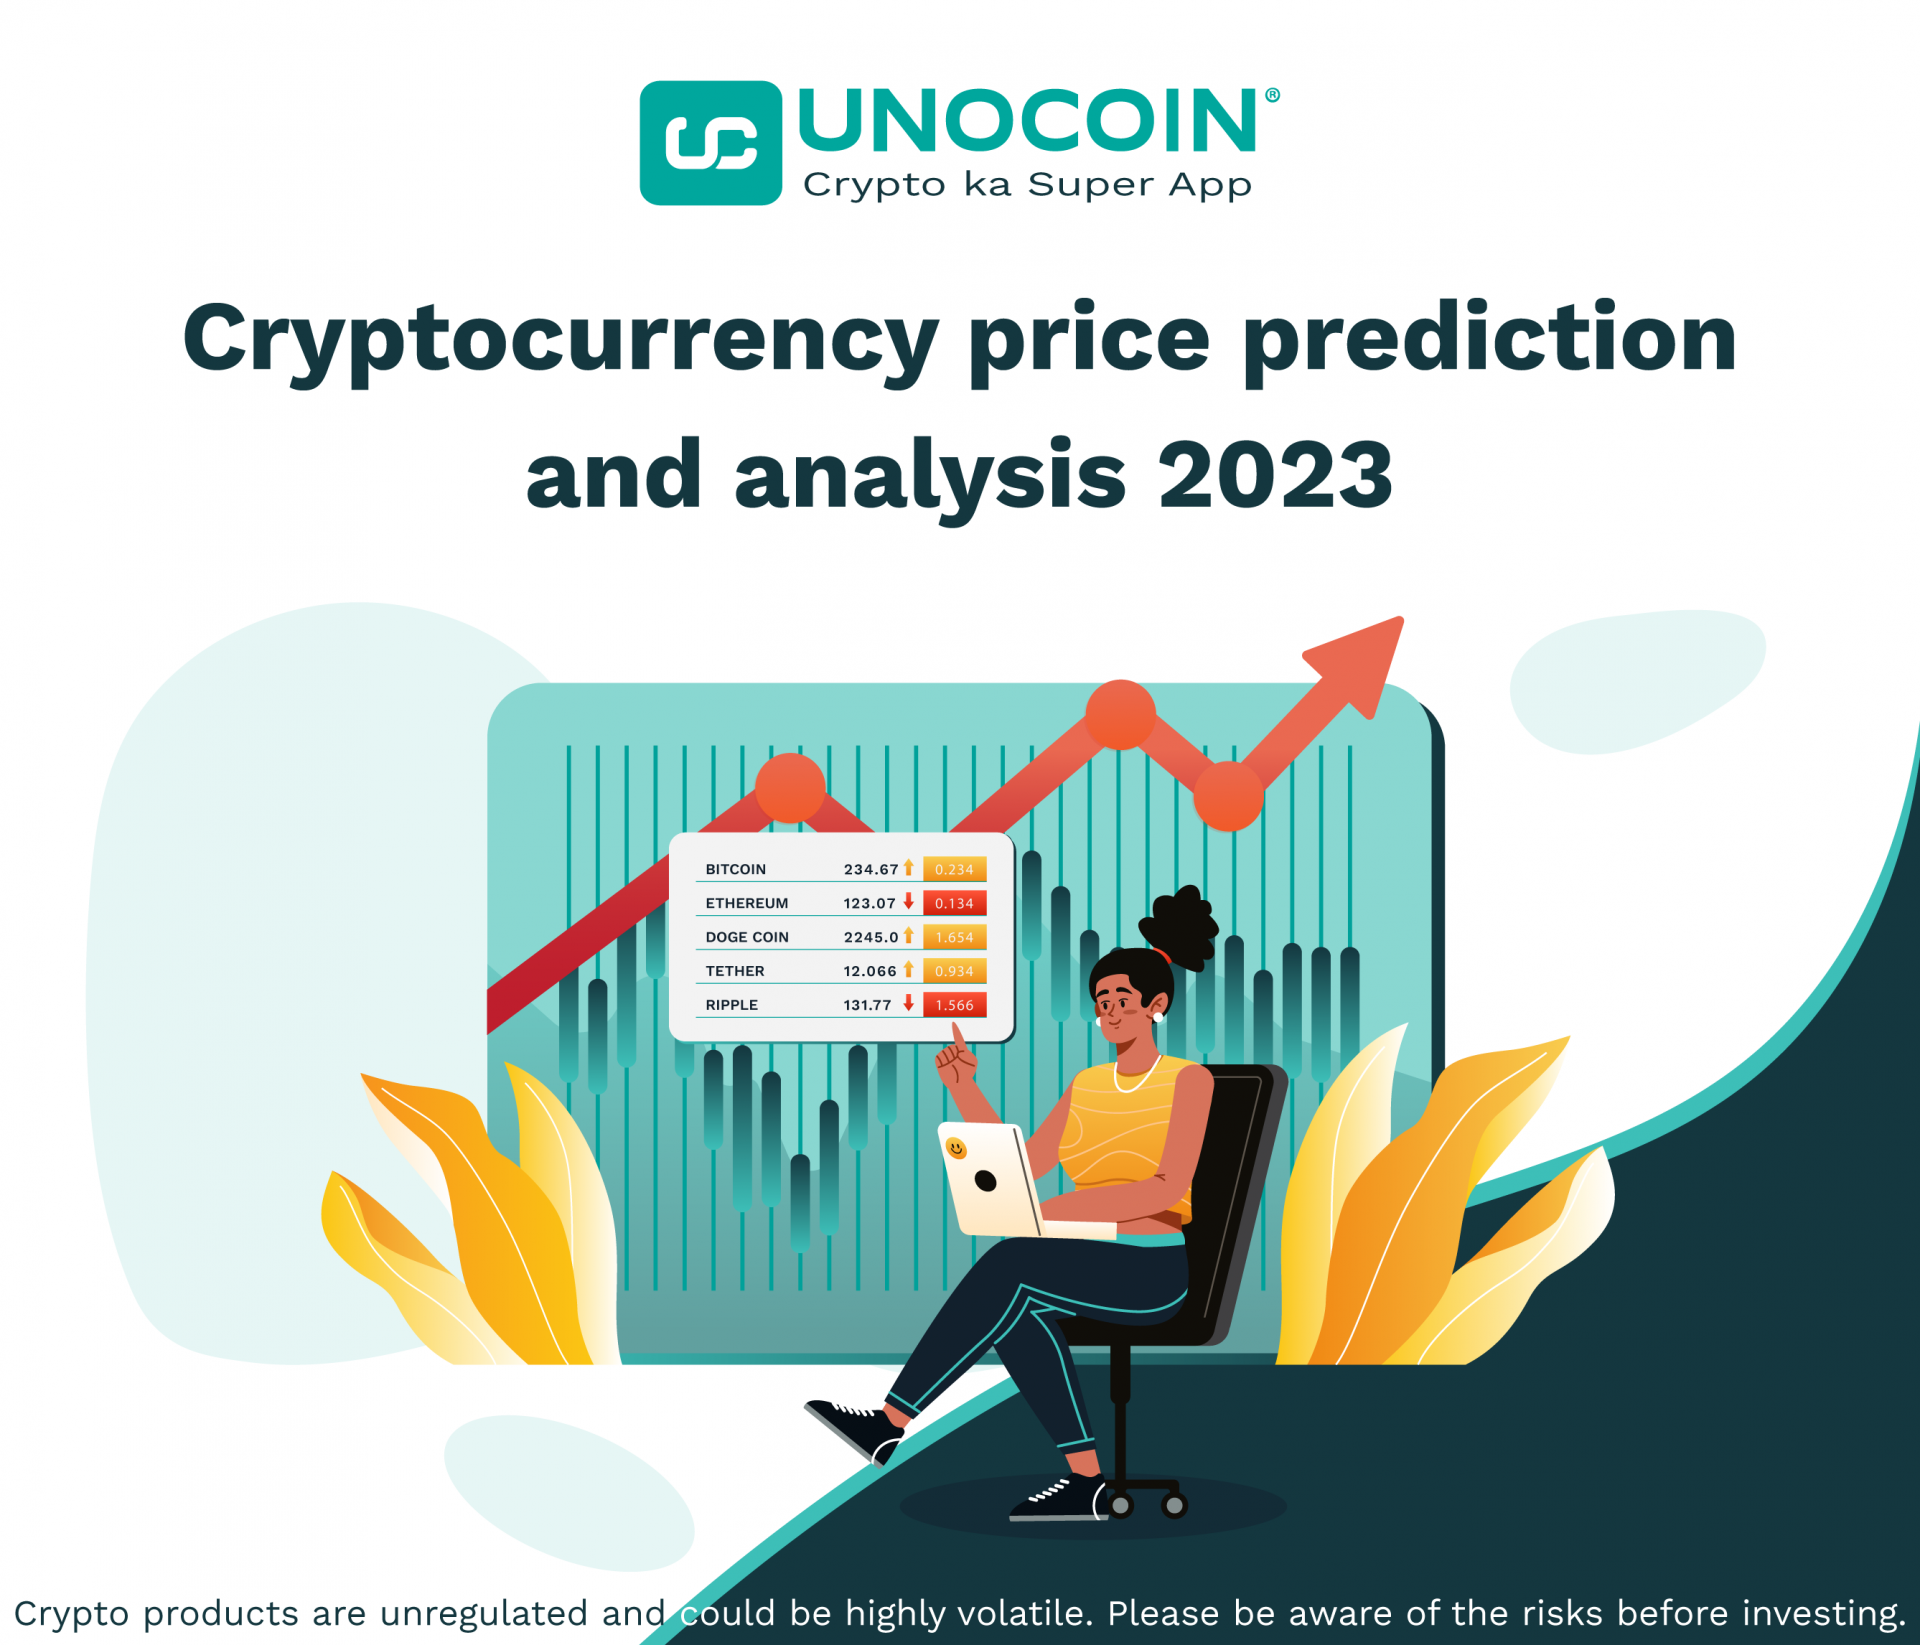 projections for cryptocurrency